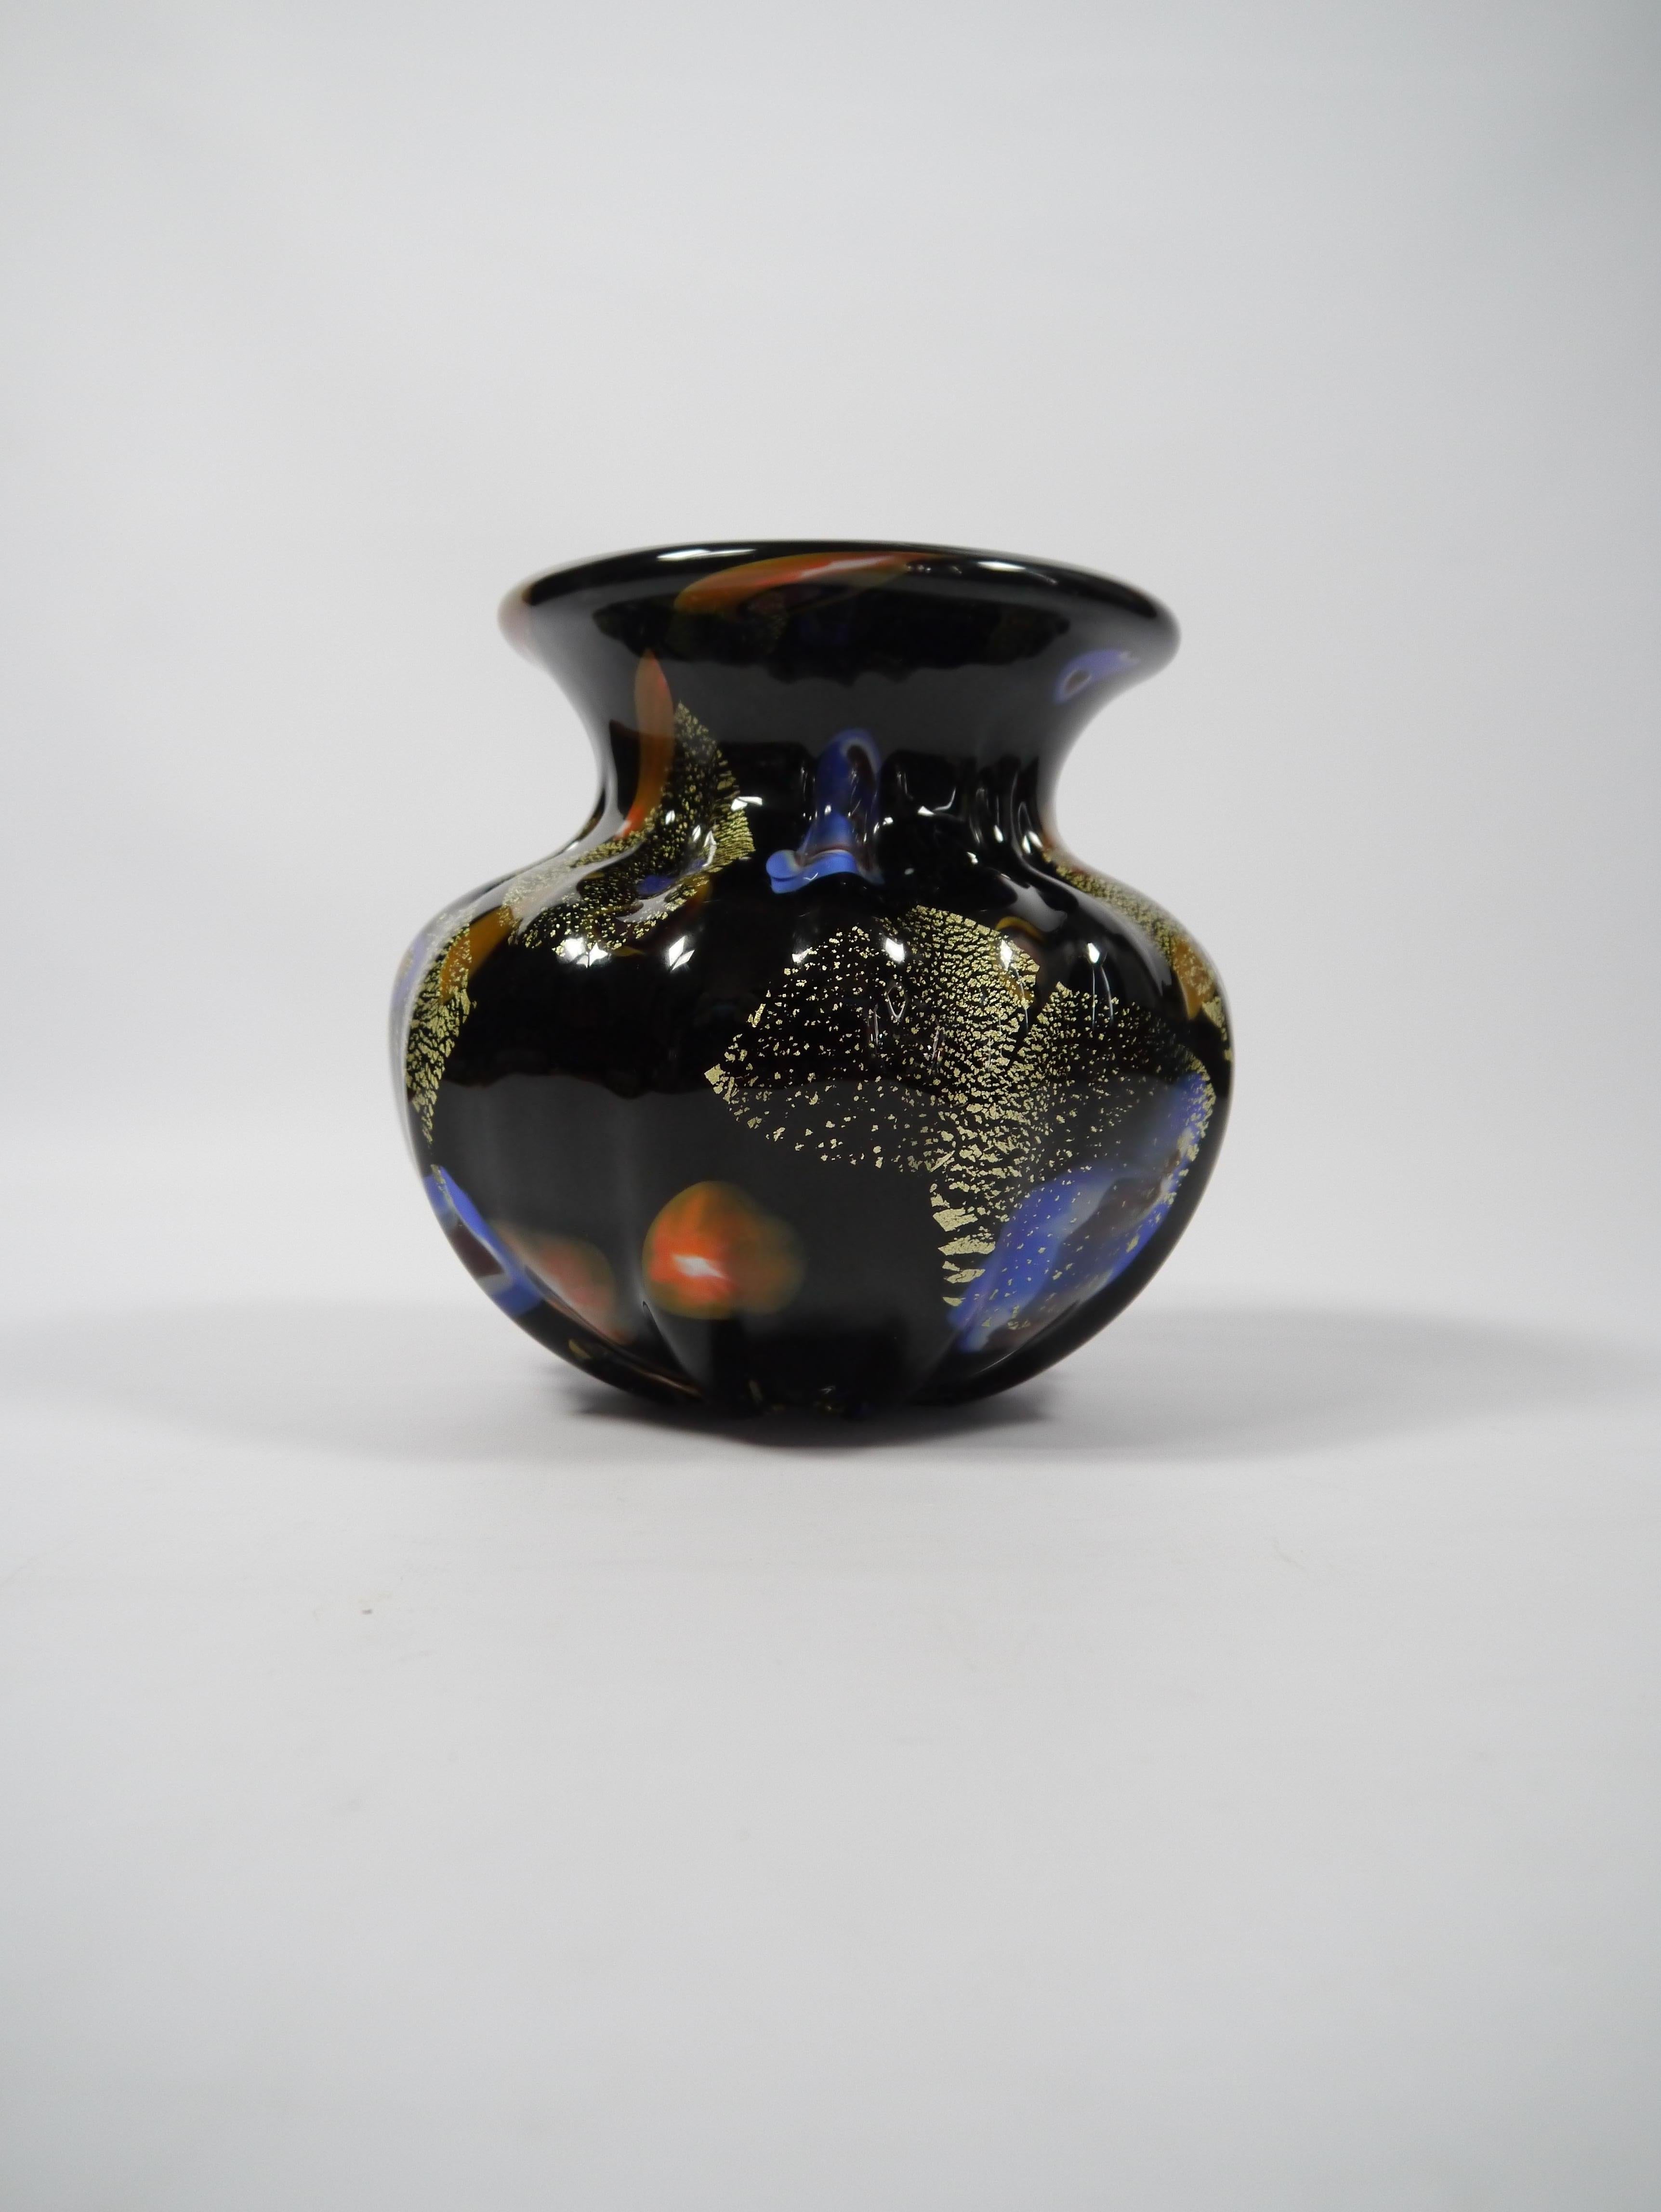 Rare glass vase hand blown by Japanese glass artist Toshichi (Tosti) Iwata (1893-1980), for Kamei Osaka in the 1950s. Jet black throughout and made in Sommerso, millefiori and avventurine technique giving the vase a depth and pattern that makes this